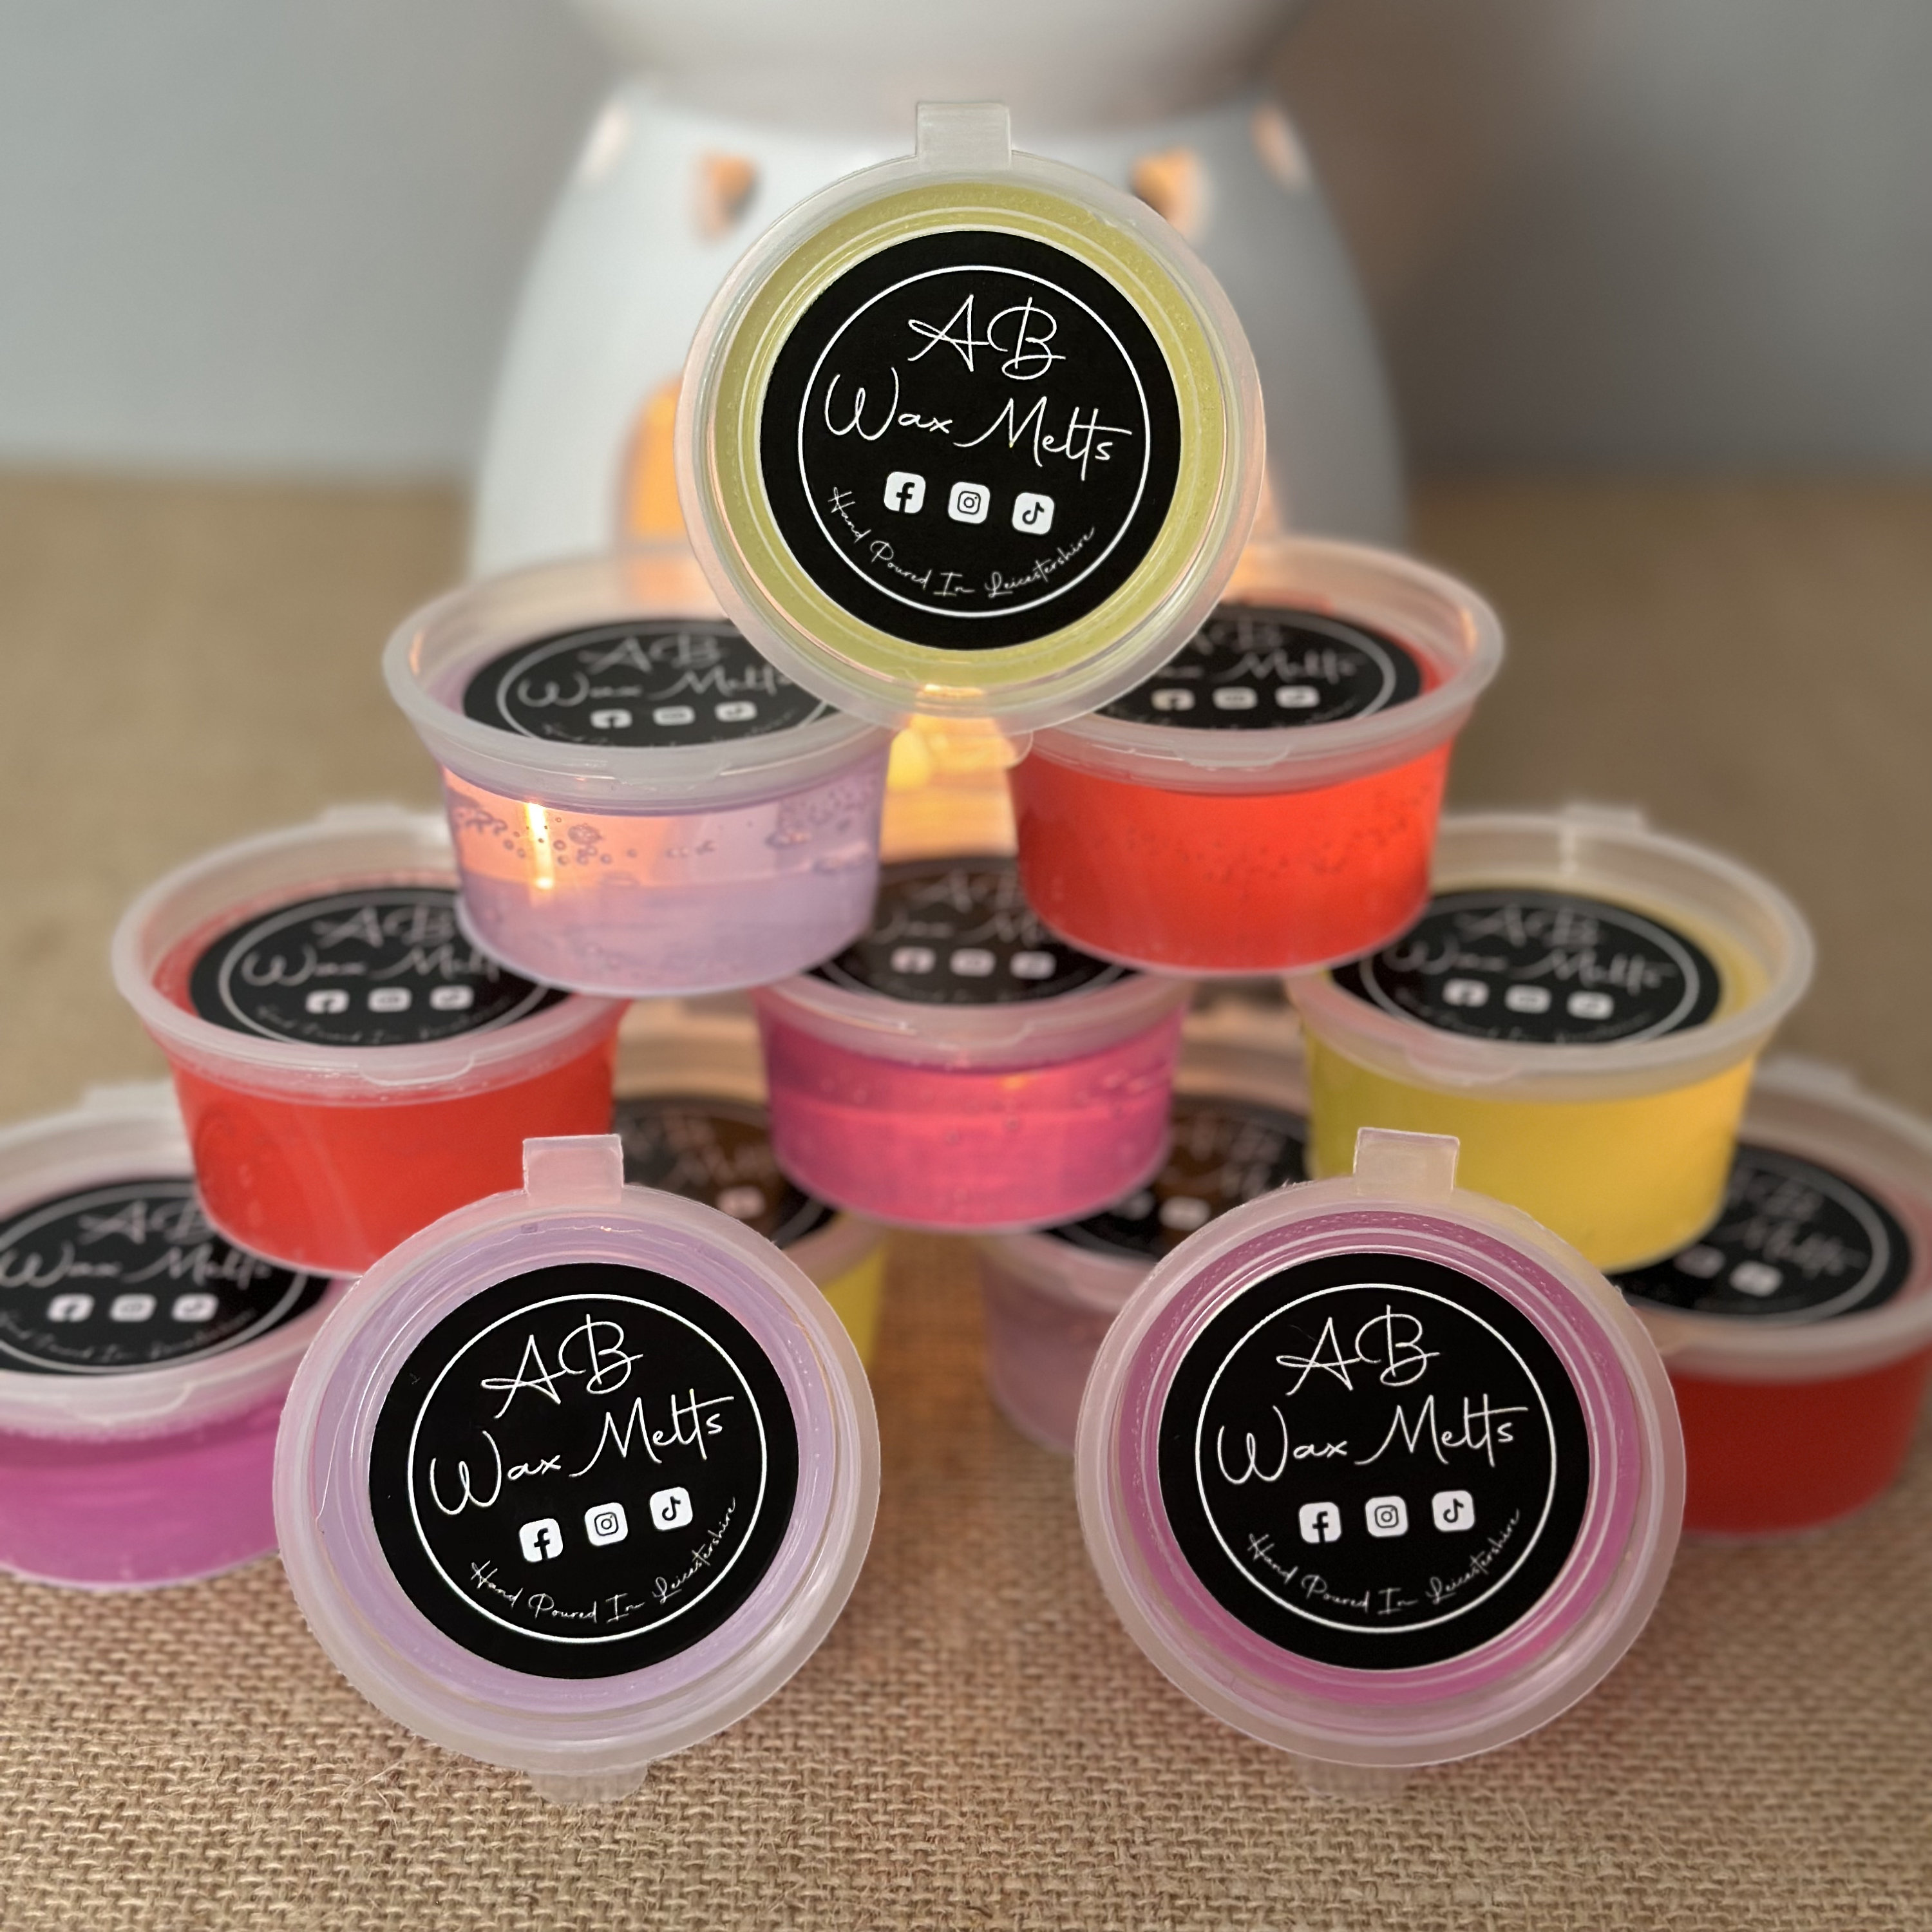 Fresh Unstoppable) - Gel Wax Melts - HIGHLY SCENTED - Jelly Wax Melts